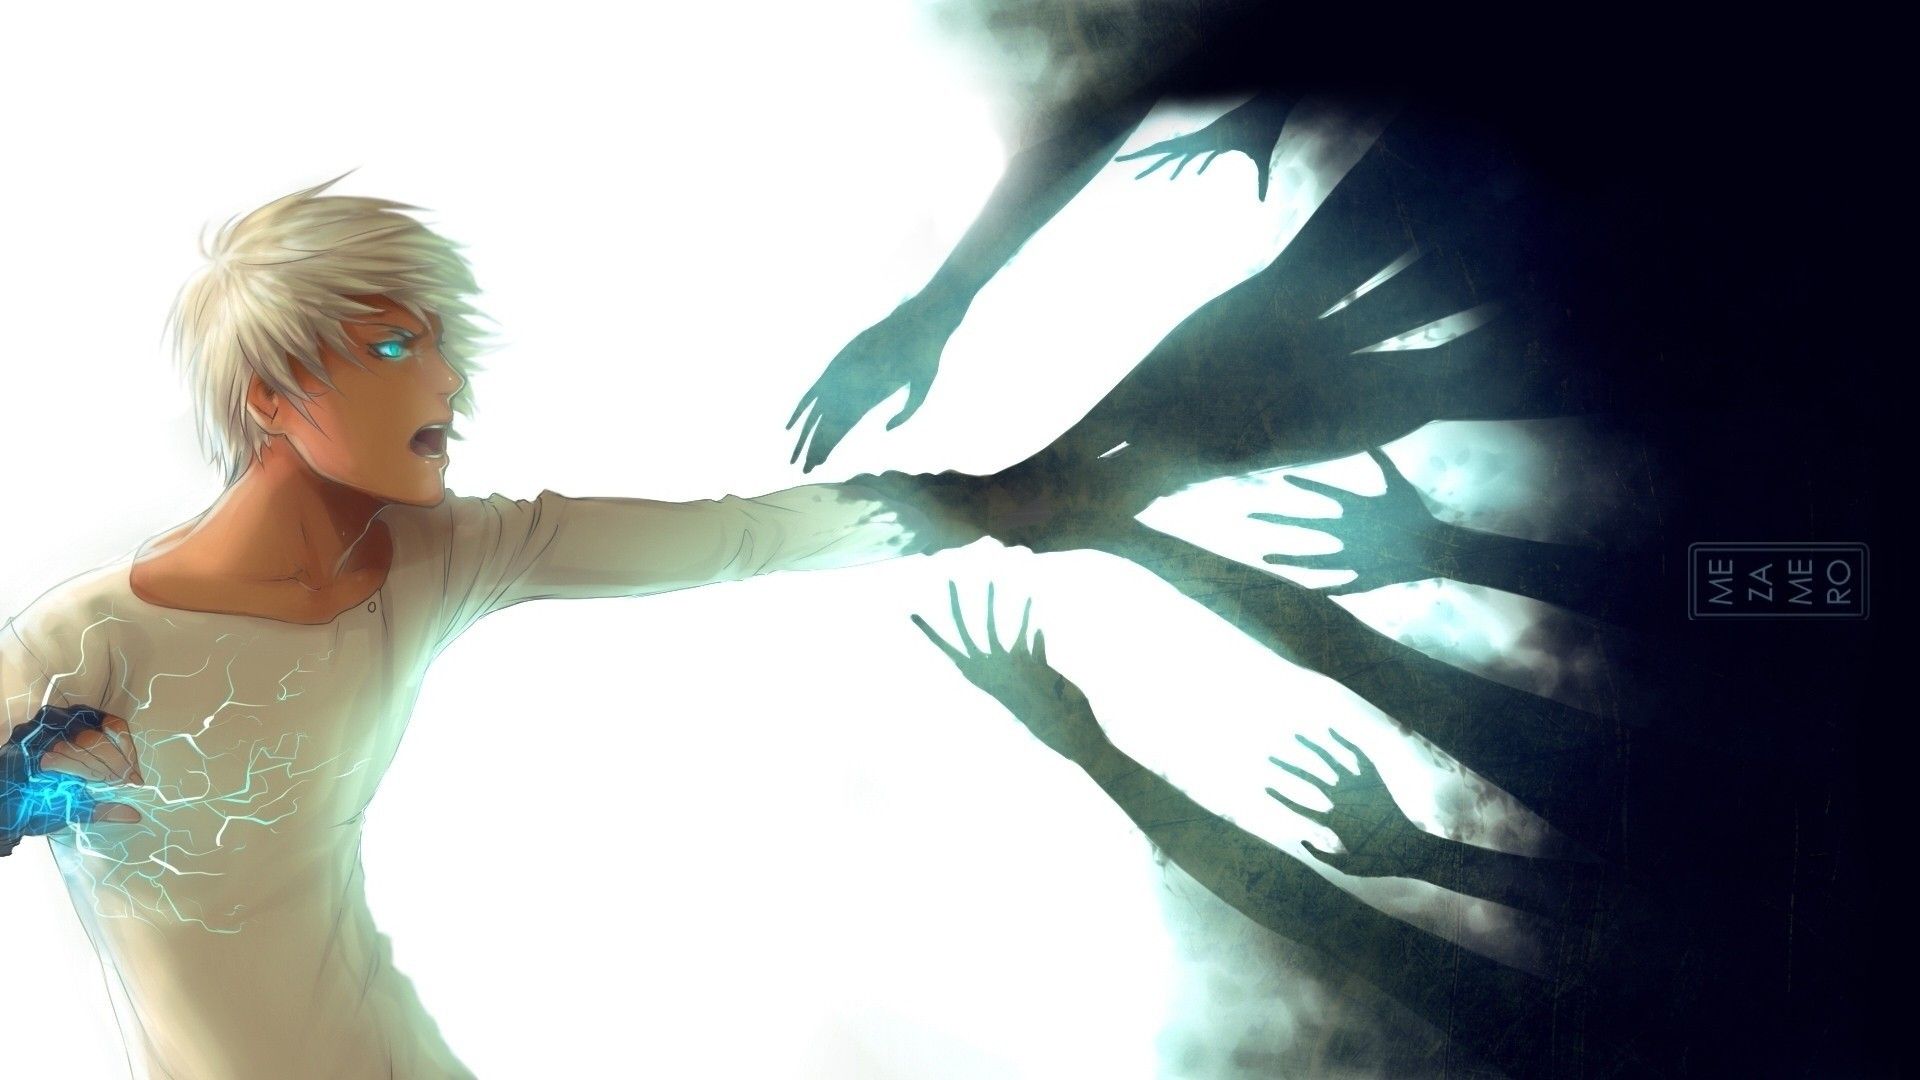 Full HD Wallpaper cry energy ghost hand sight, Desktop Background